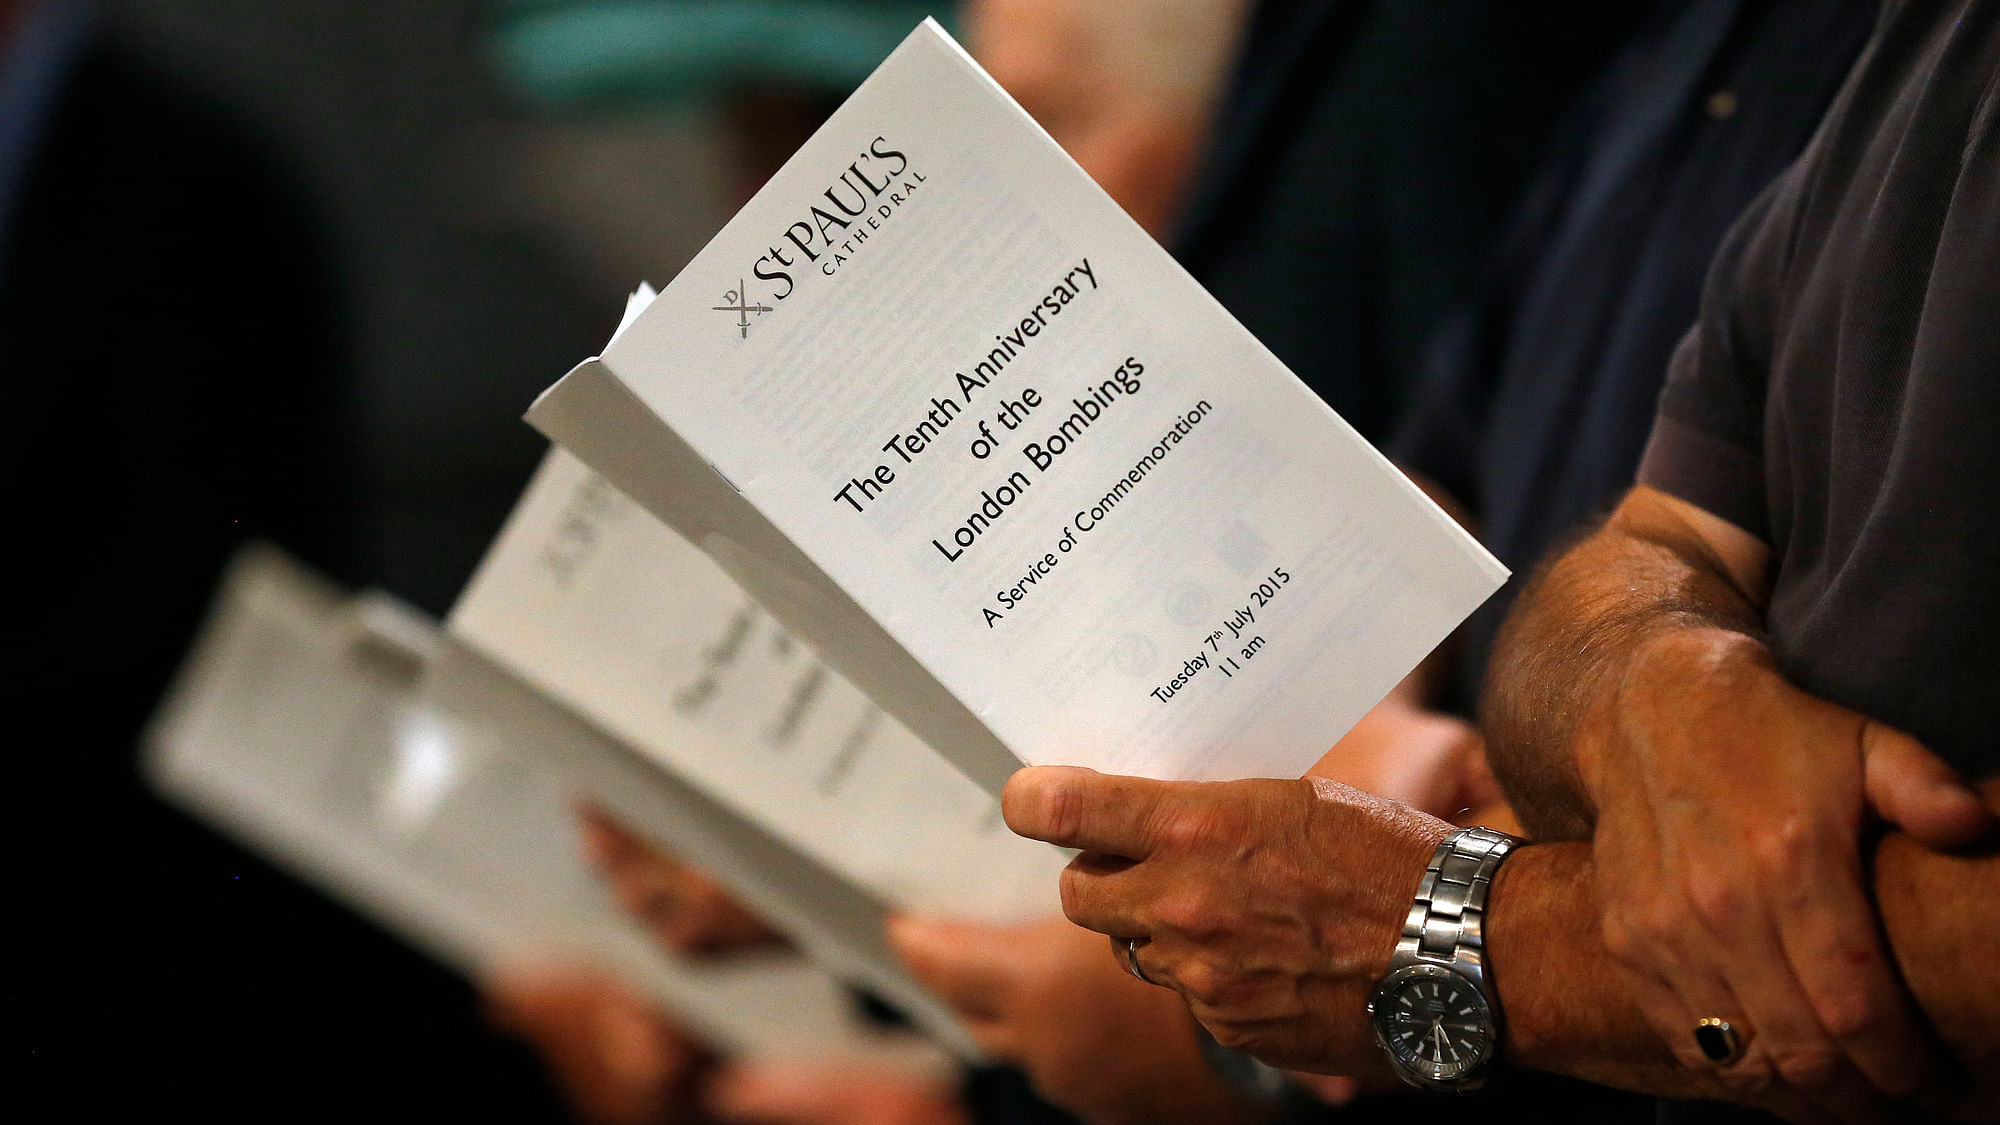 Visitors hold the schedule during a service in St Paul’s Cathedral, London to commemorate the 12th anniversary of the London bombings. (Photo: AP)